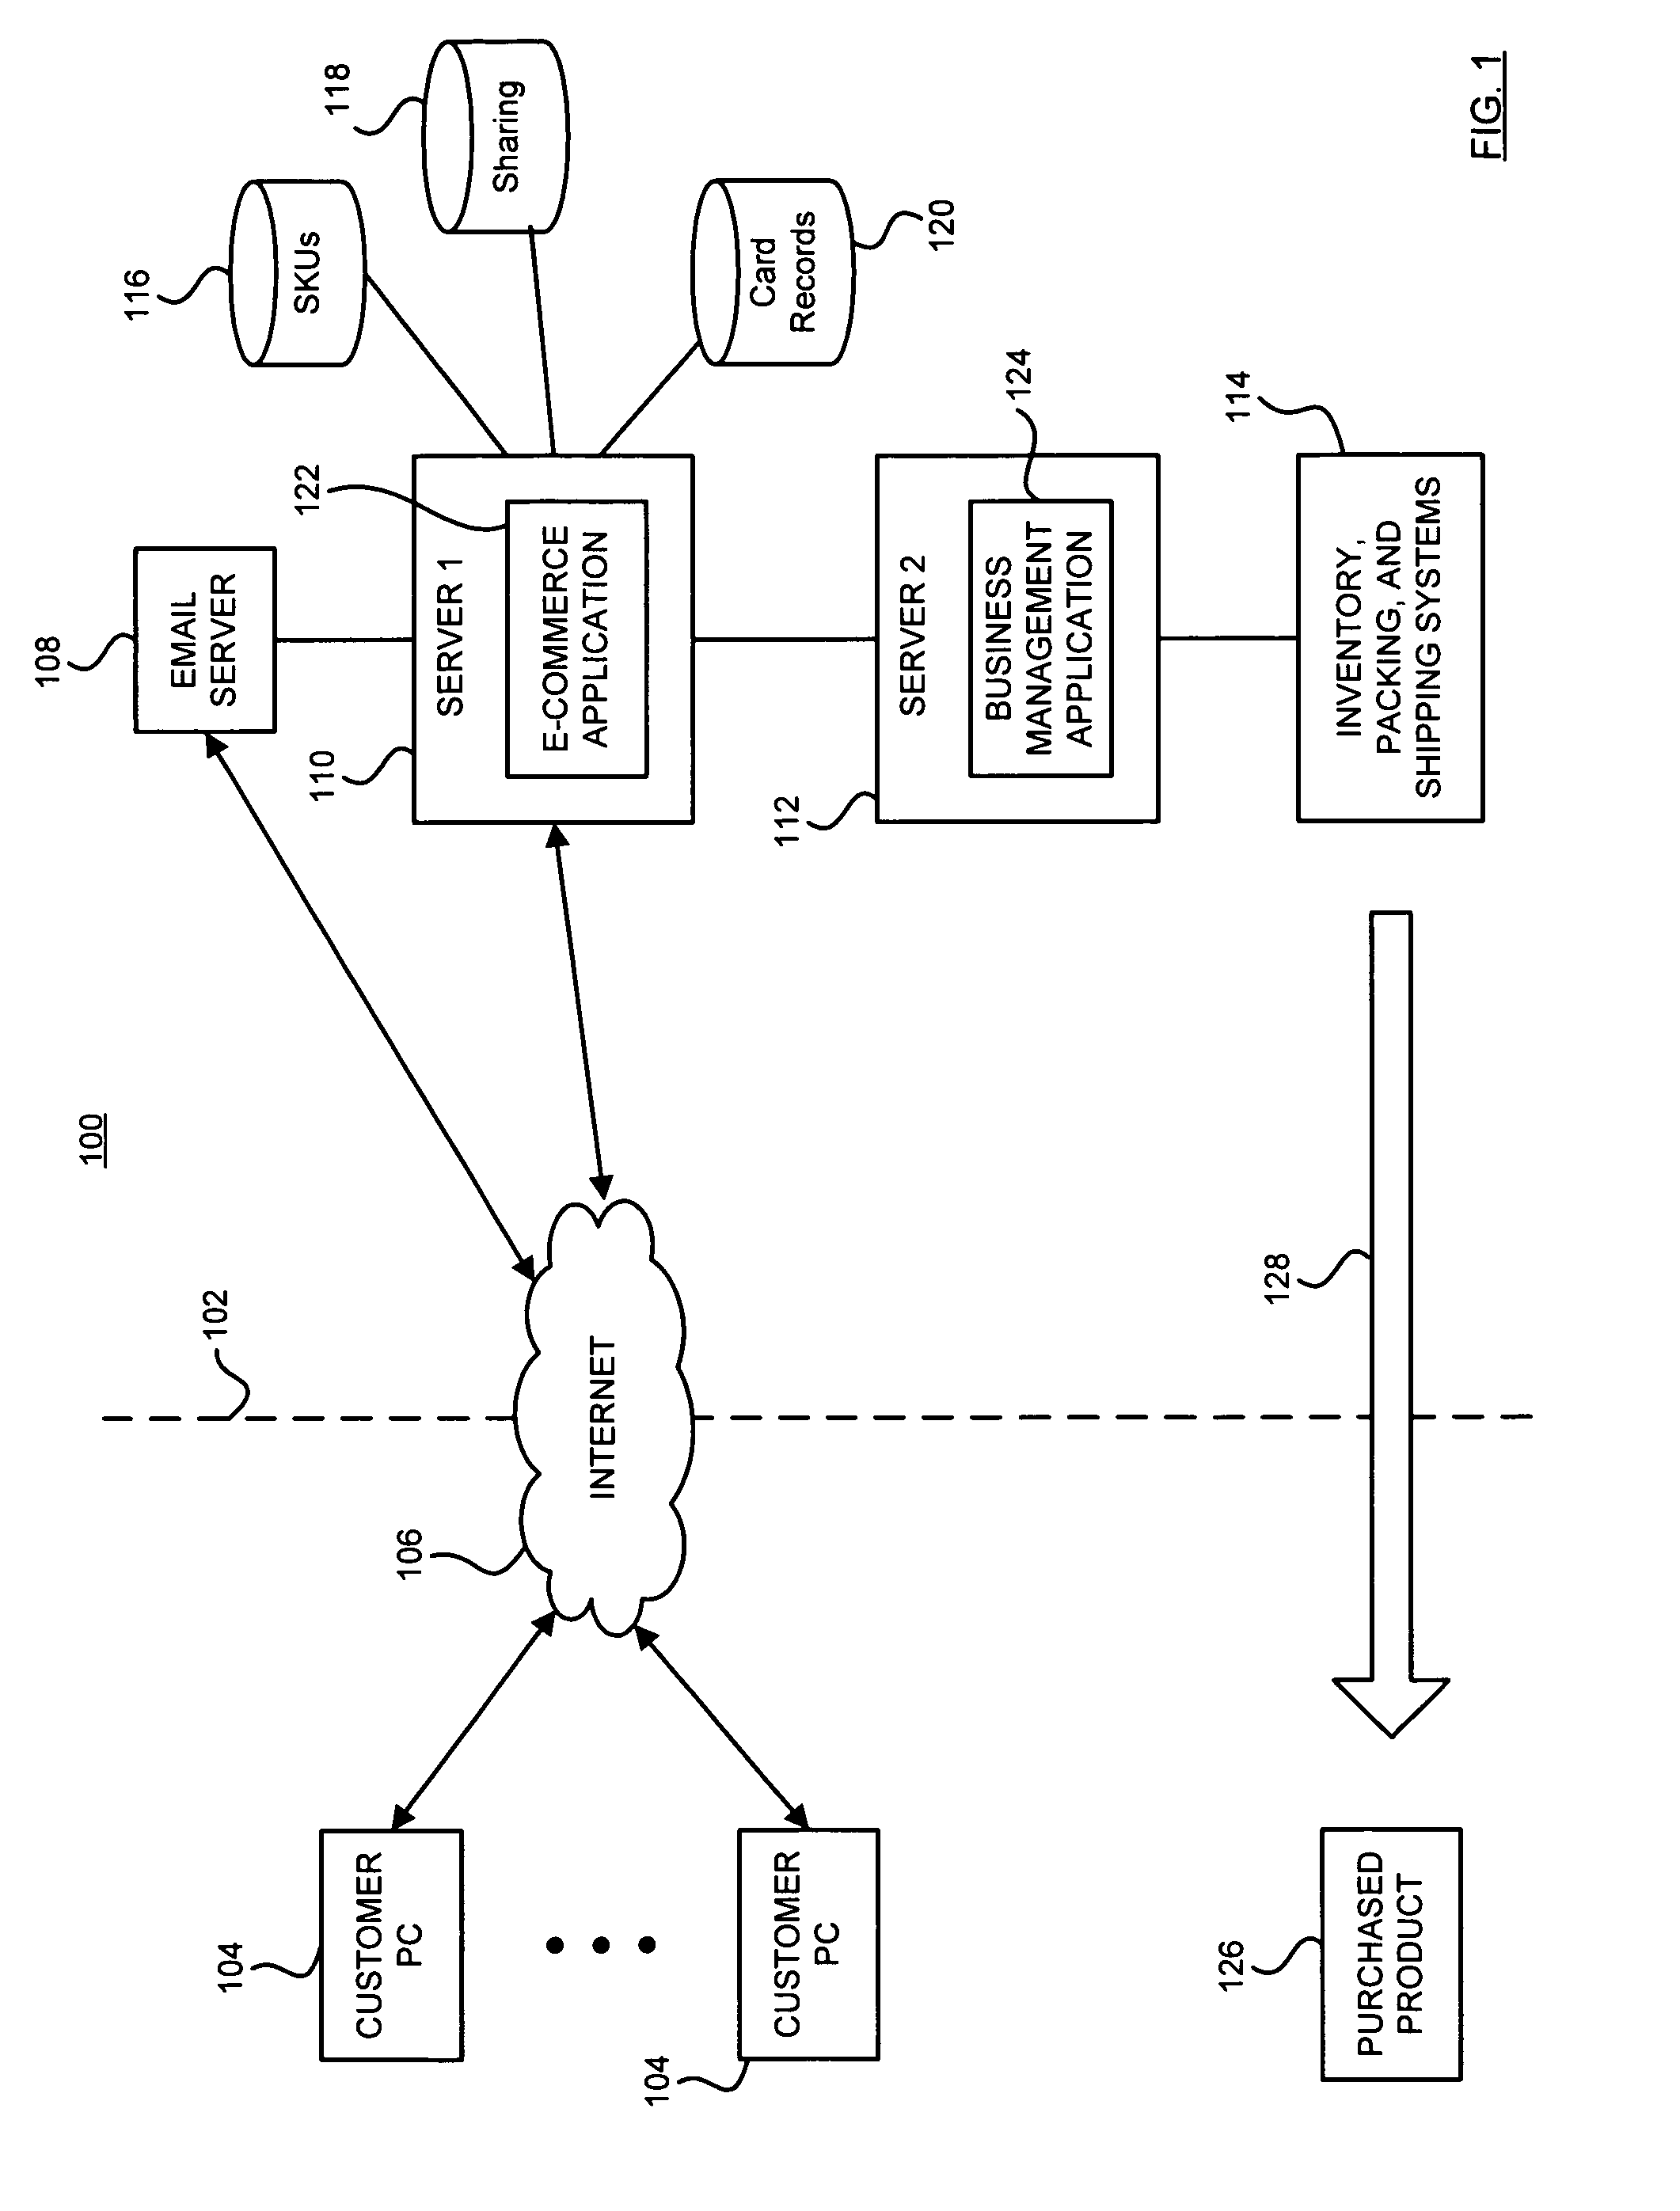 System and method for offering and managing online purchasing card transactions